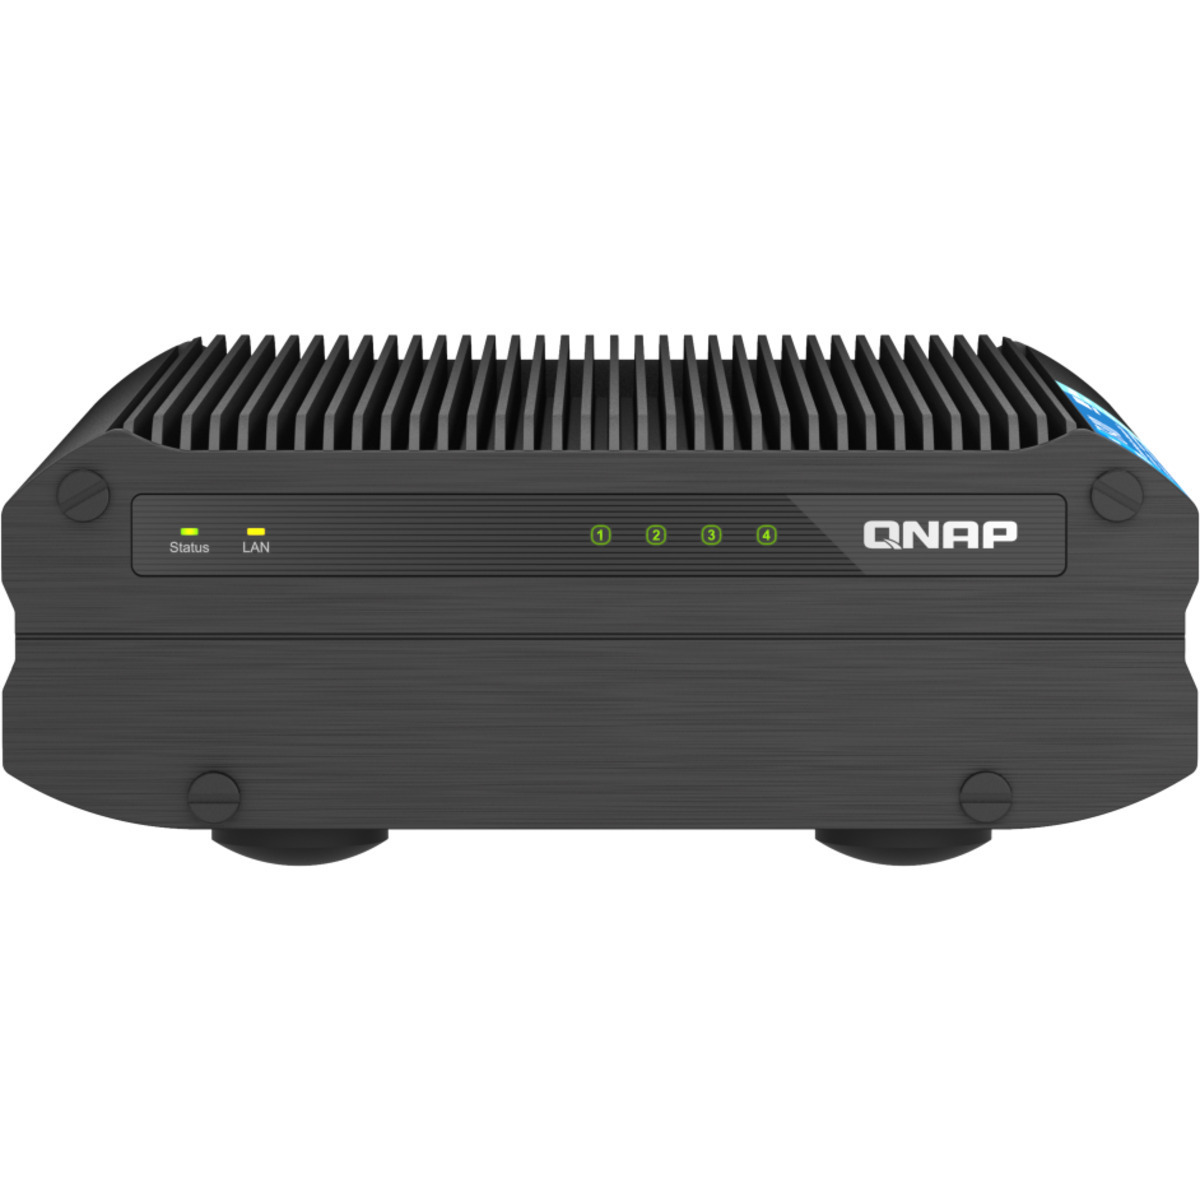 QNAP TS-i410X 4tb 4-Bay Desktop Multimedia / Power User / Business NAS - Network Attached Storage Device 4x1tb Western Digital Red SA500 WDS100T1R0A 2.5 560/530MB/s SATA 6Gb/s SSD NAS Class Drives Installed - Burn-In Tested TS-i410X